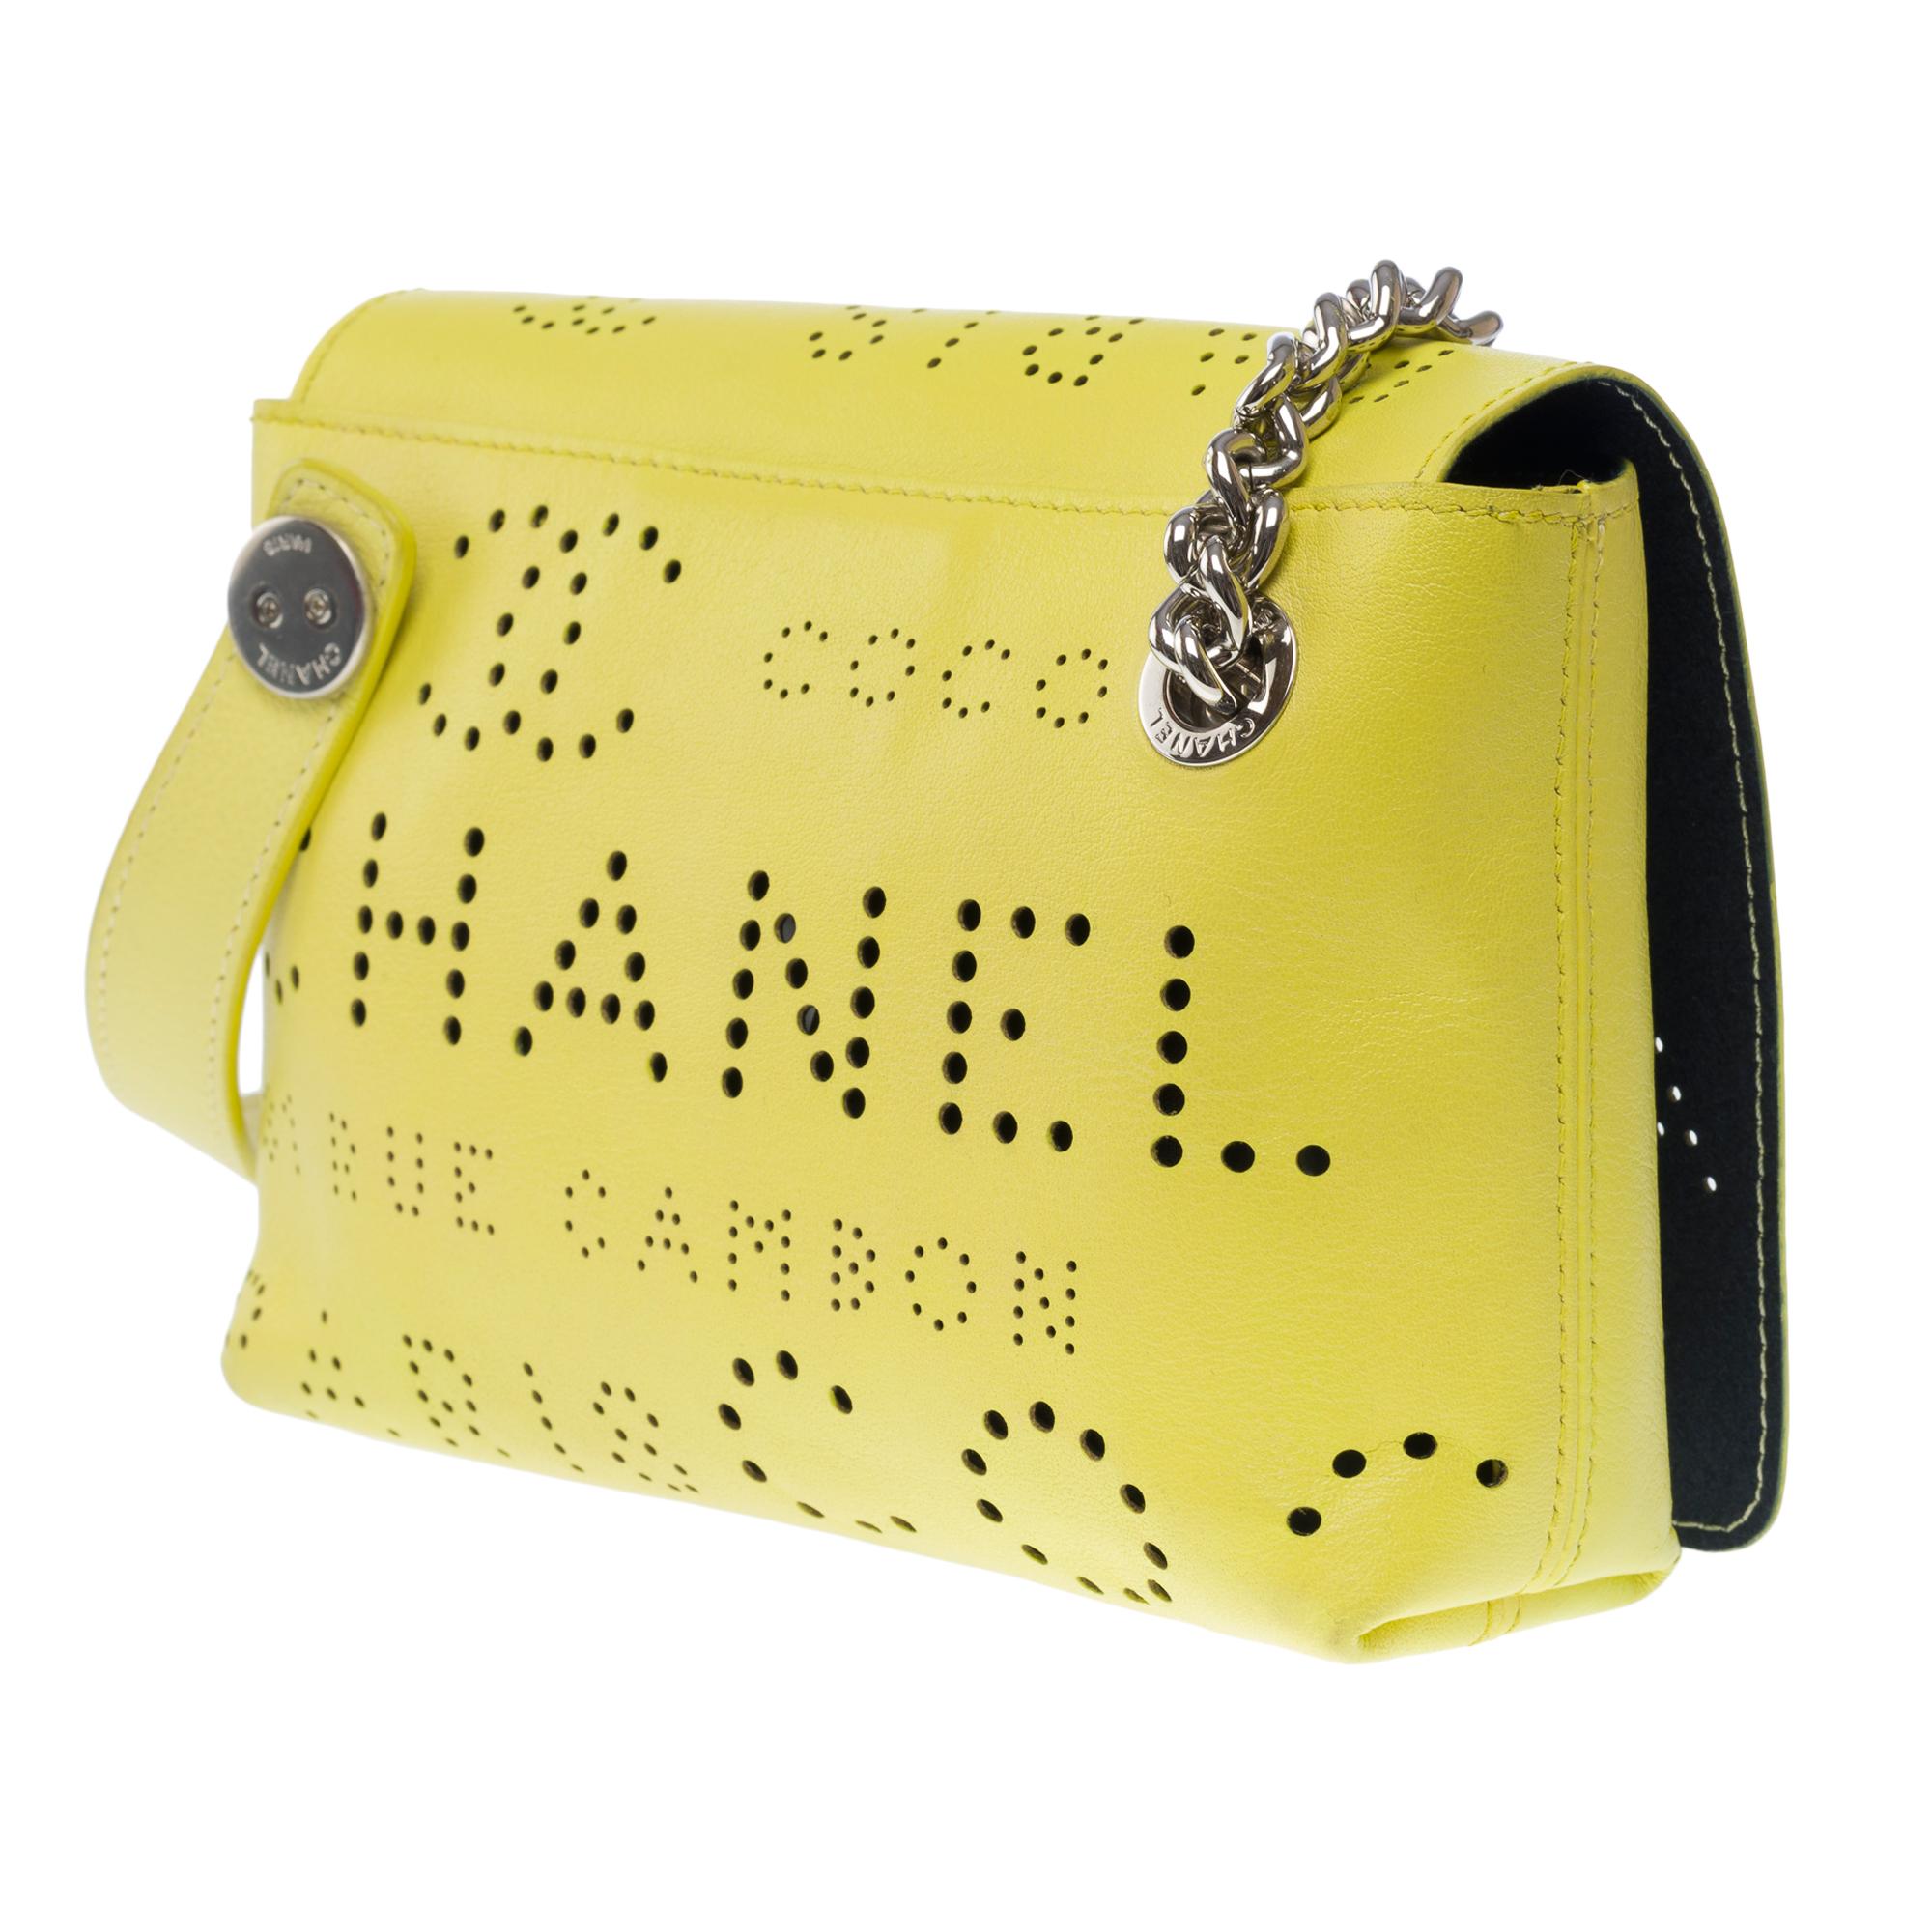 Chanel Classic shoulder flap bag in Yellow perforated leather, SHW 3